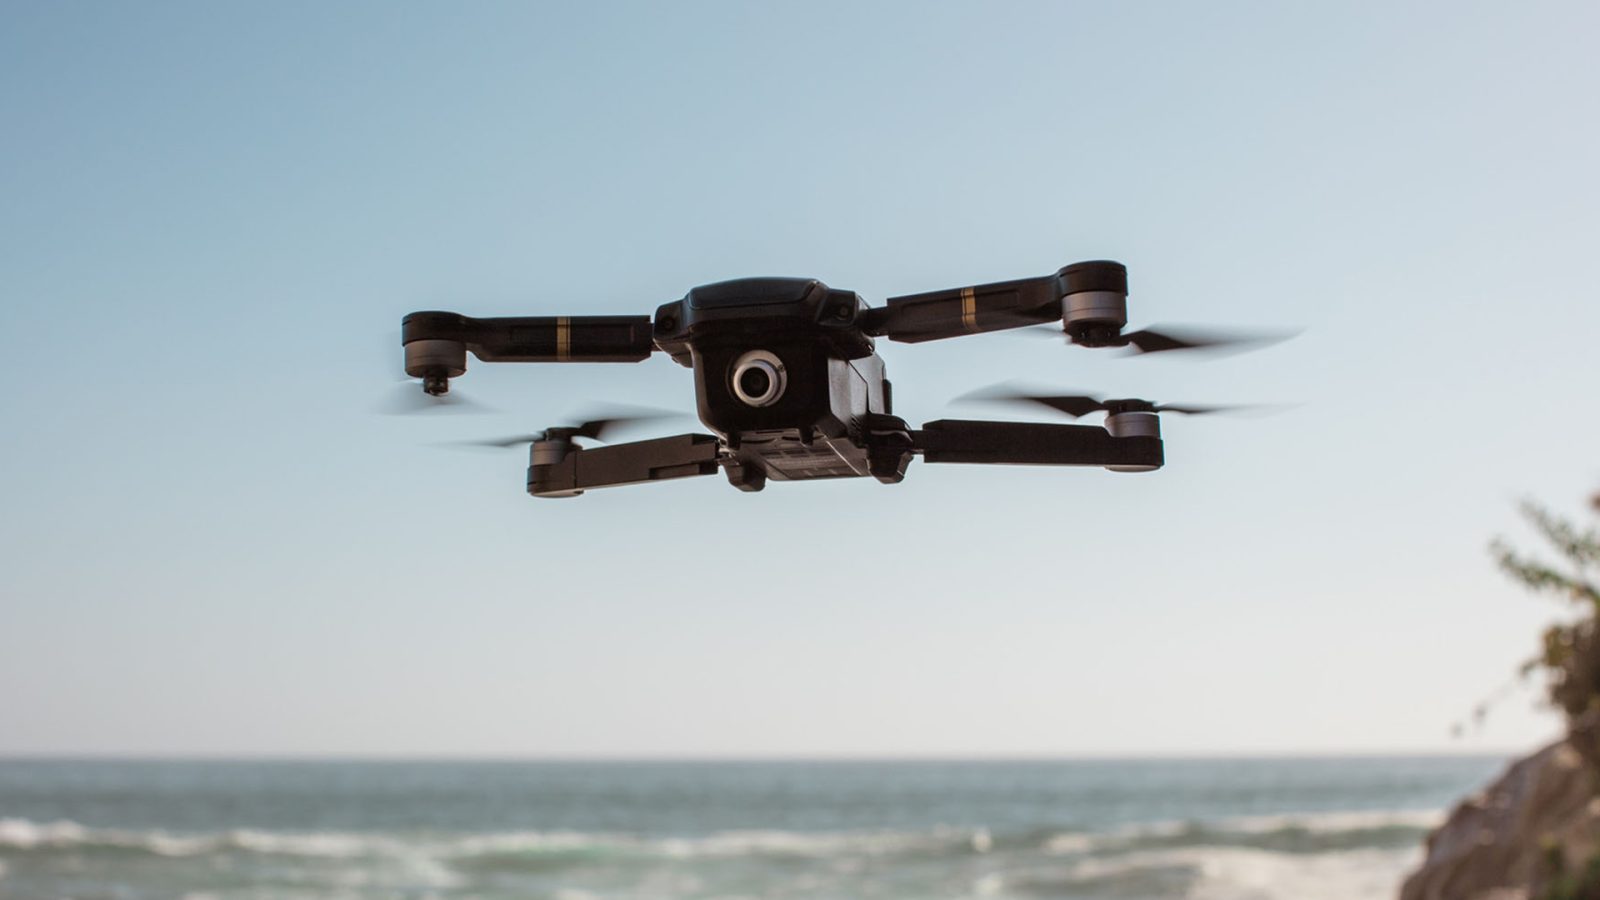 The Mystic drone uses AI to take on DJI's Intelligent Flight Modes